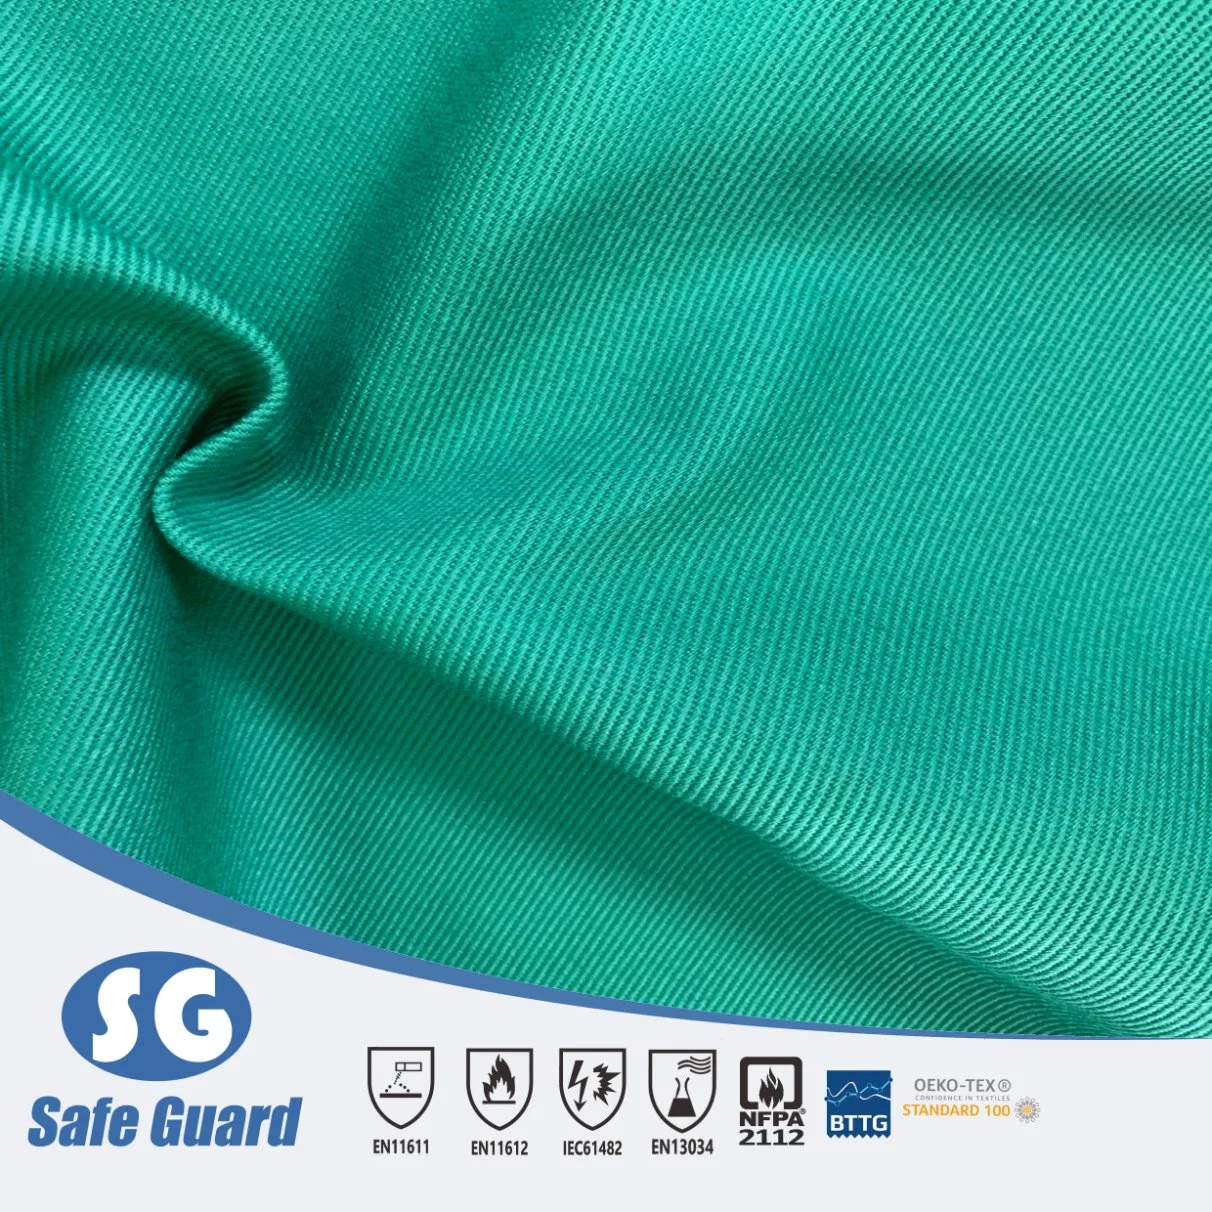 330GSM 100% Cotton Flame Resistant Fabric for Protective Workwear